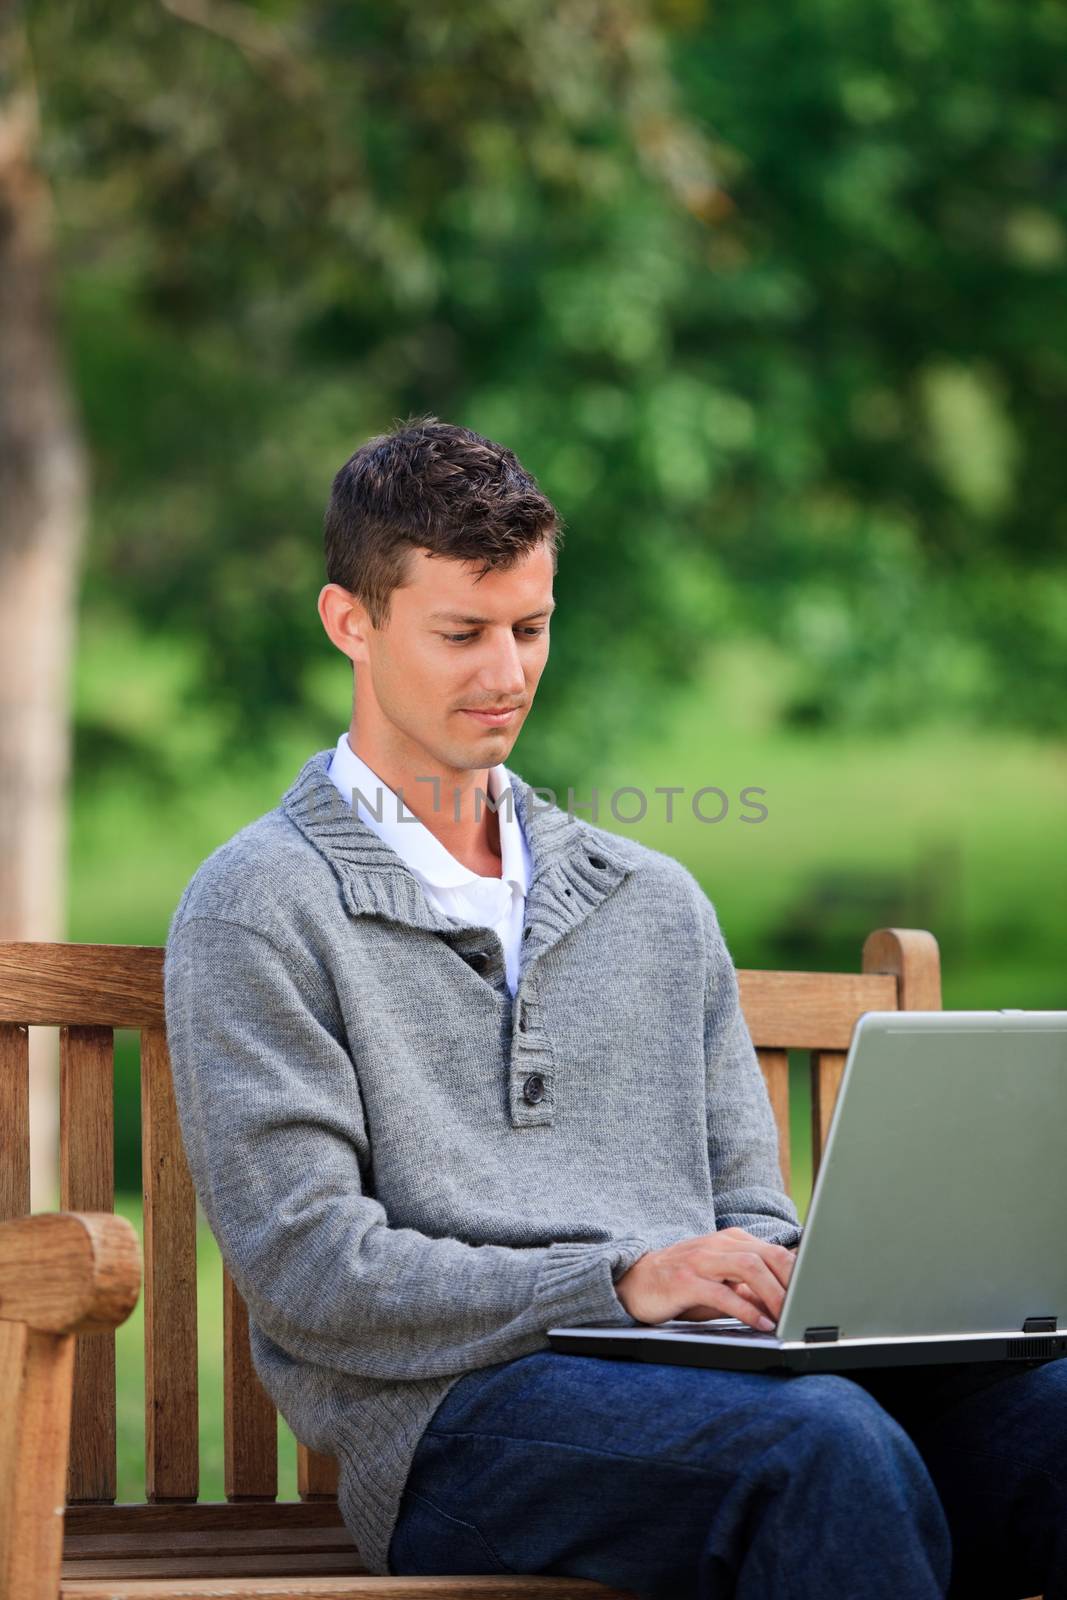 Concentrated man working on his laptop during the summer